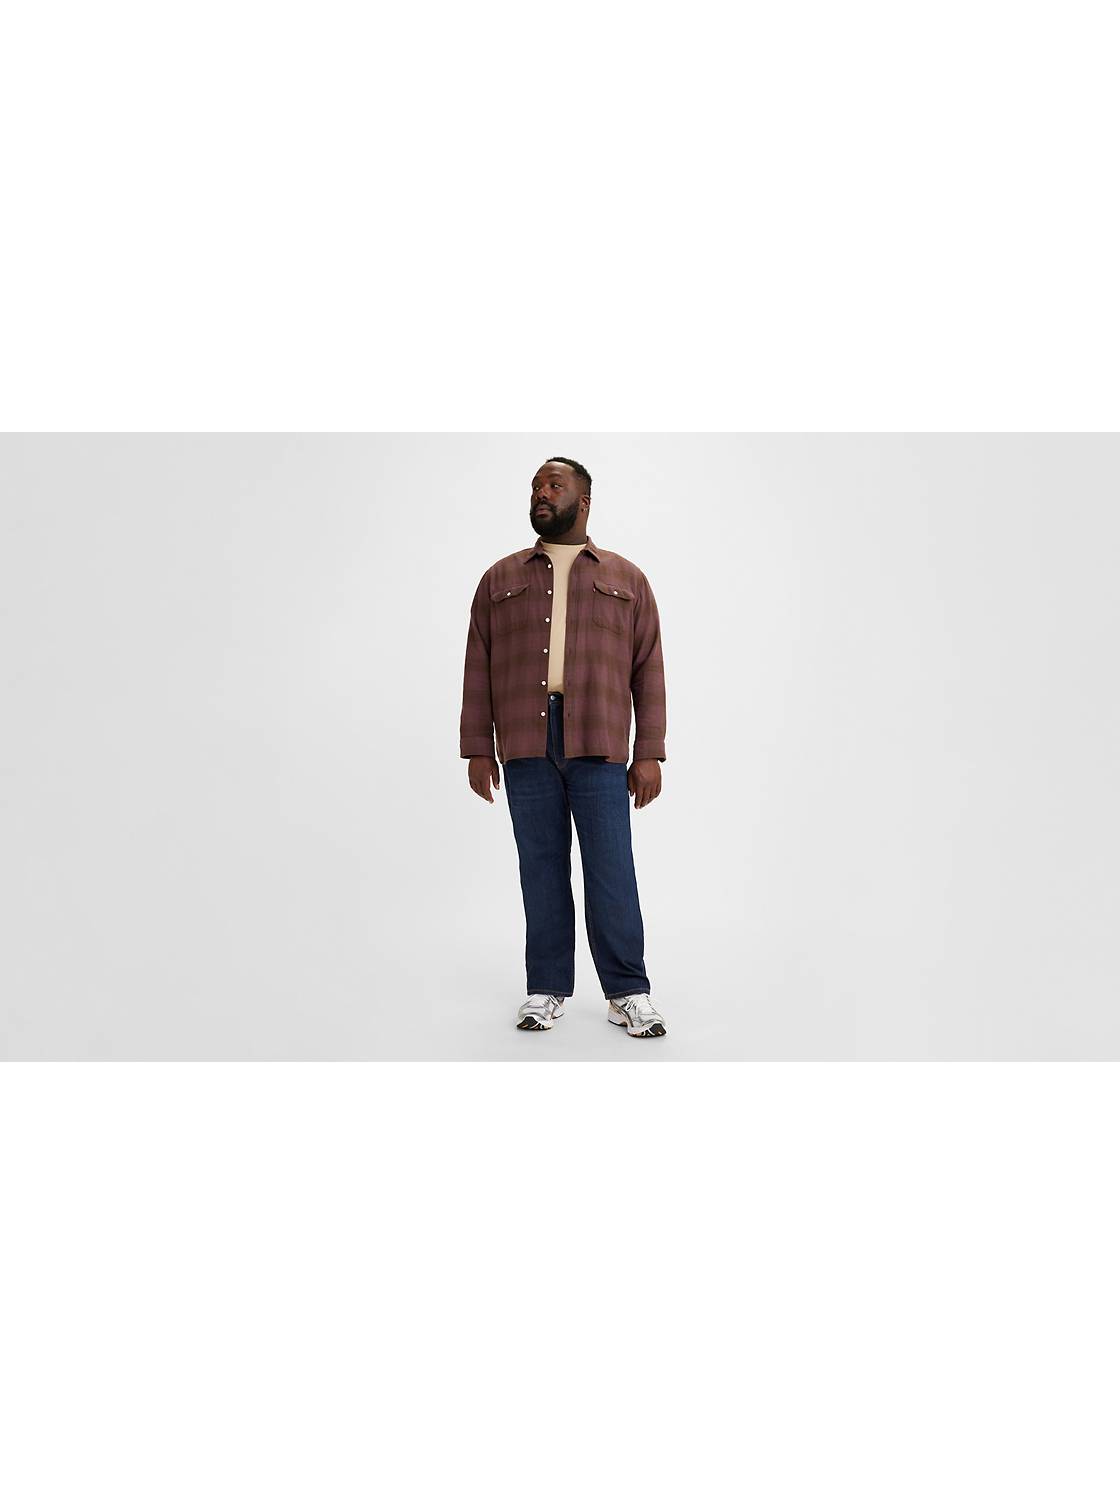 Big And Tall Clothing For Men